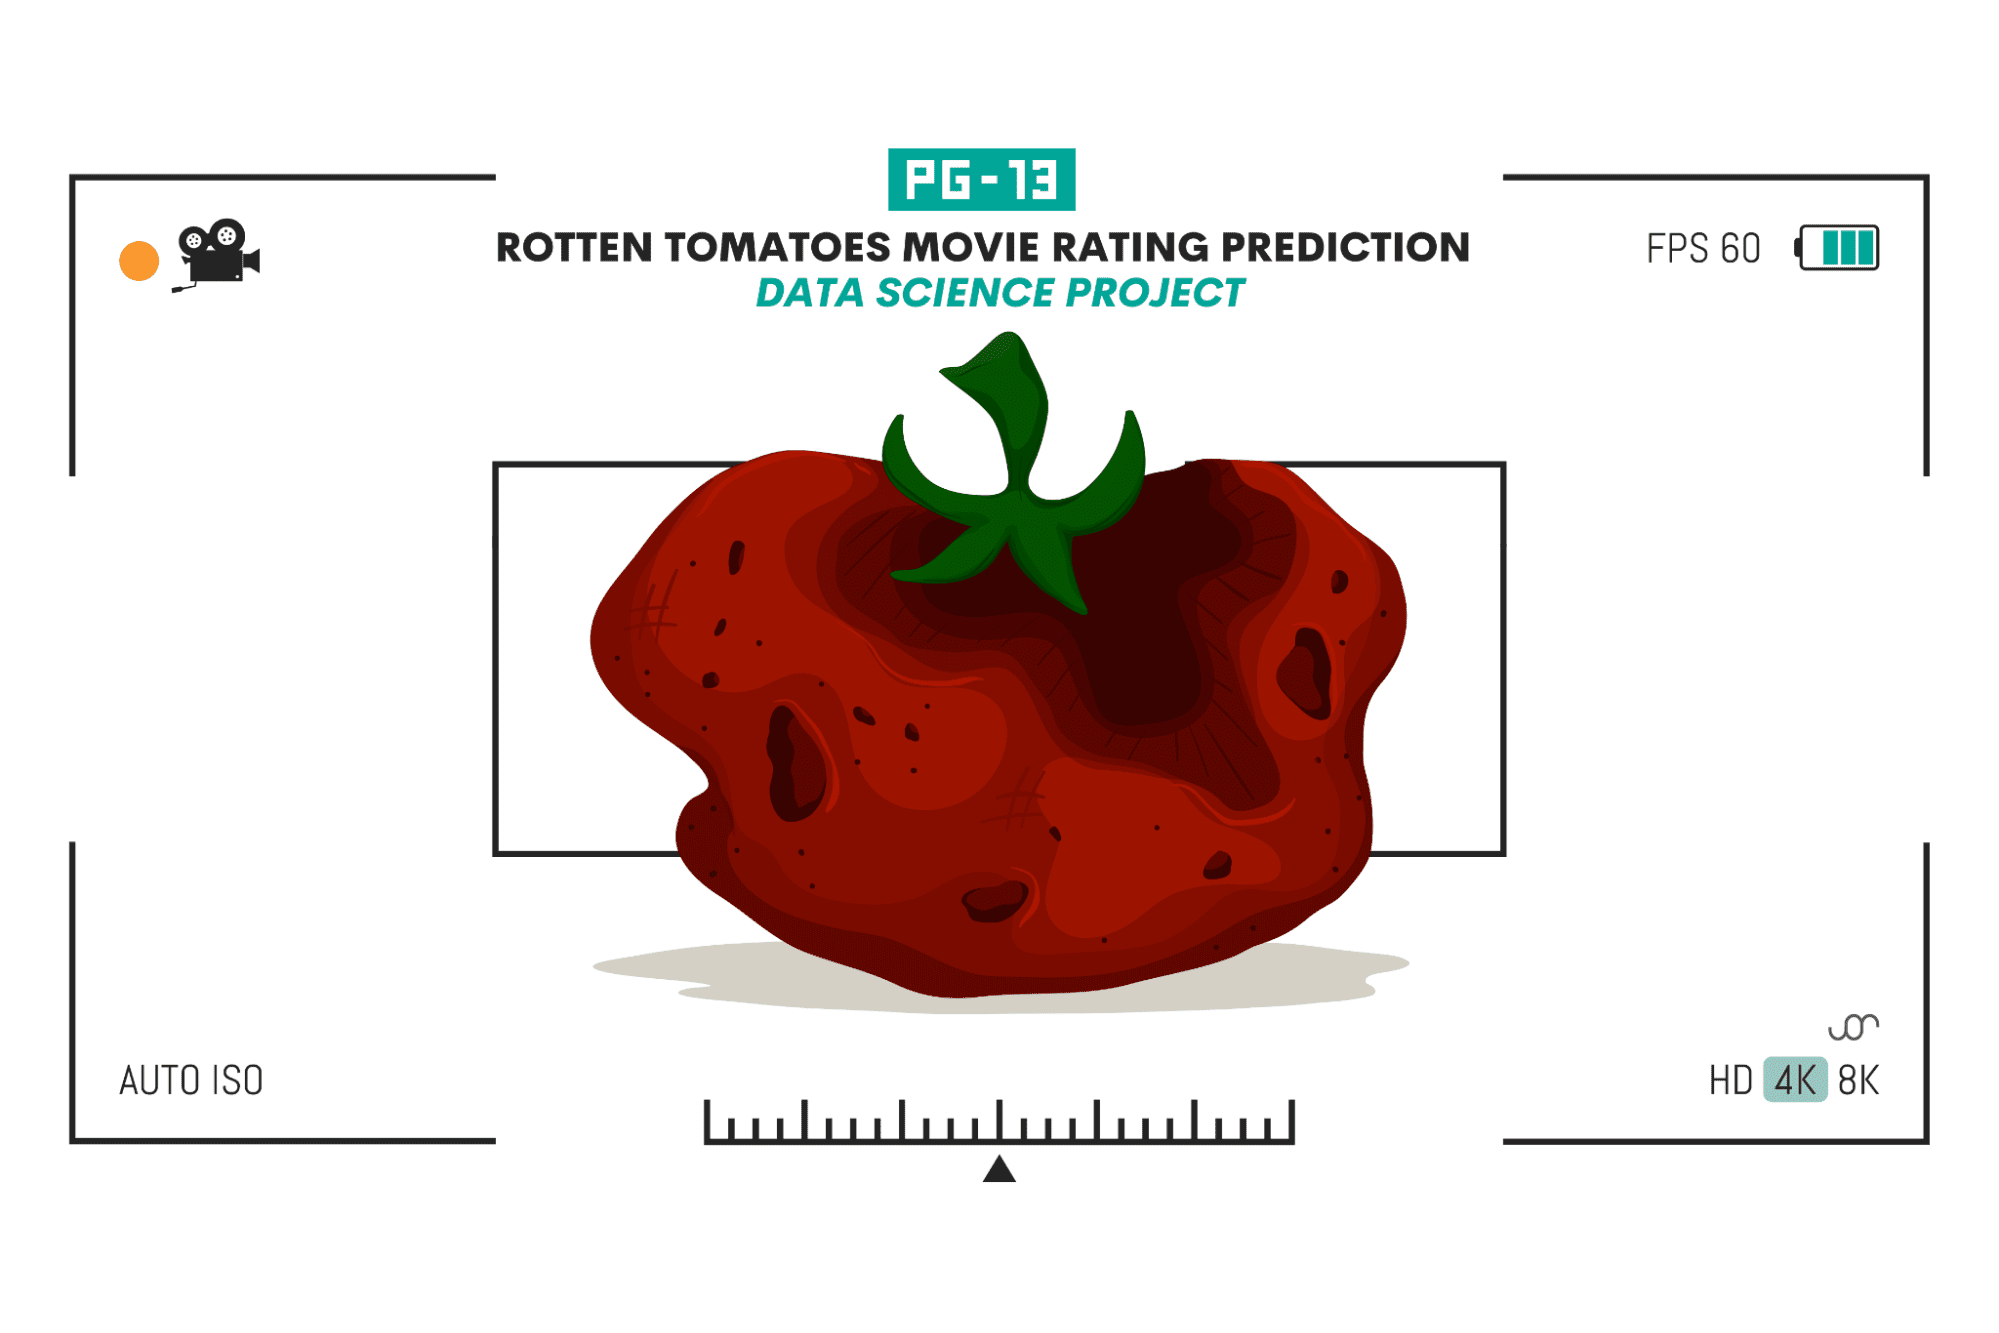 Bright Leaves  Rotten Tomatoes